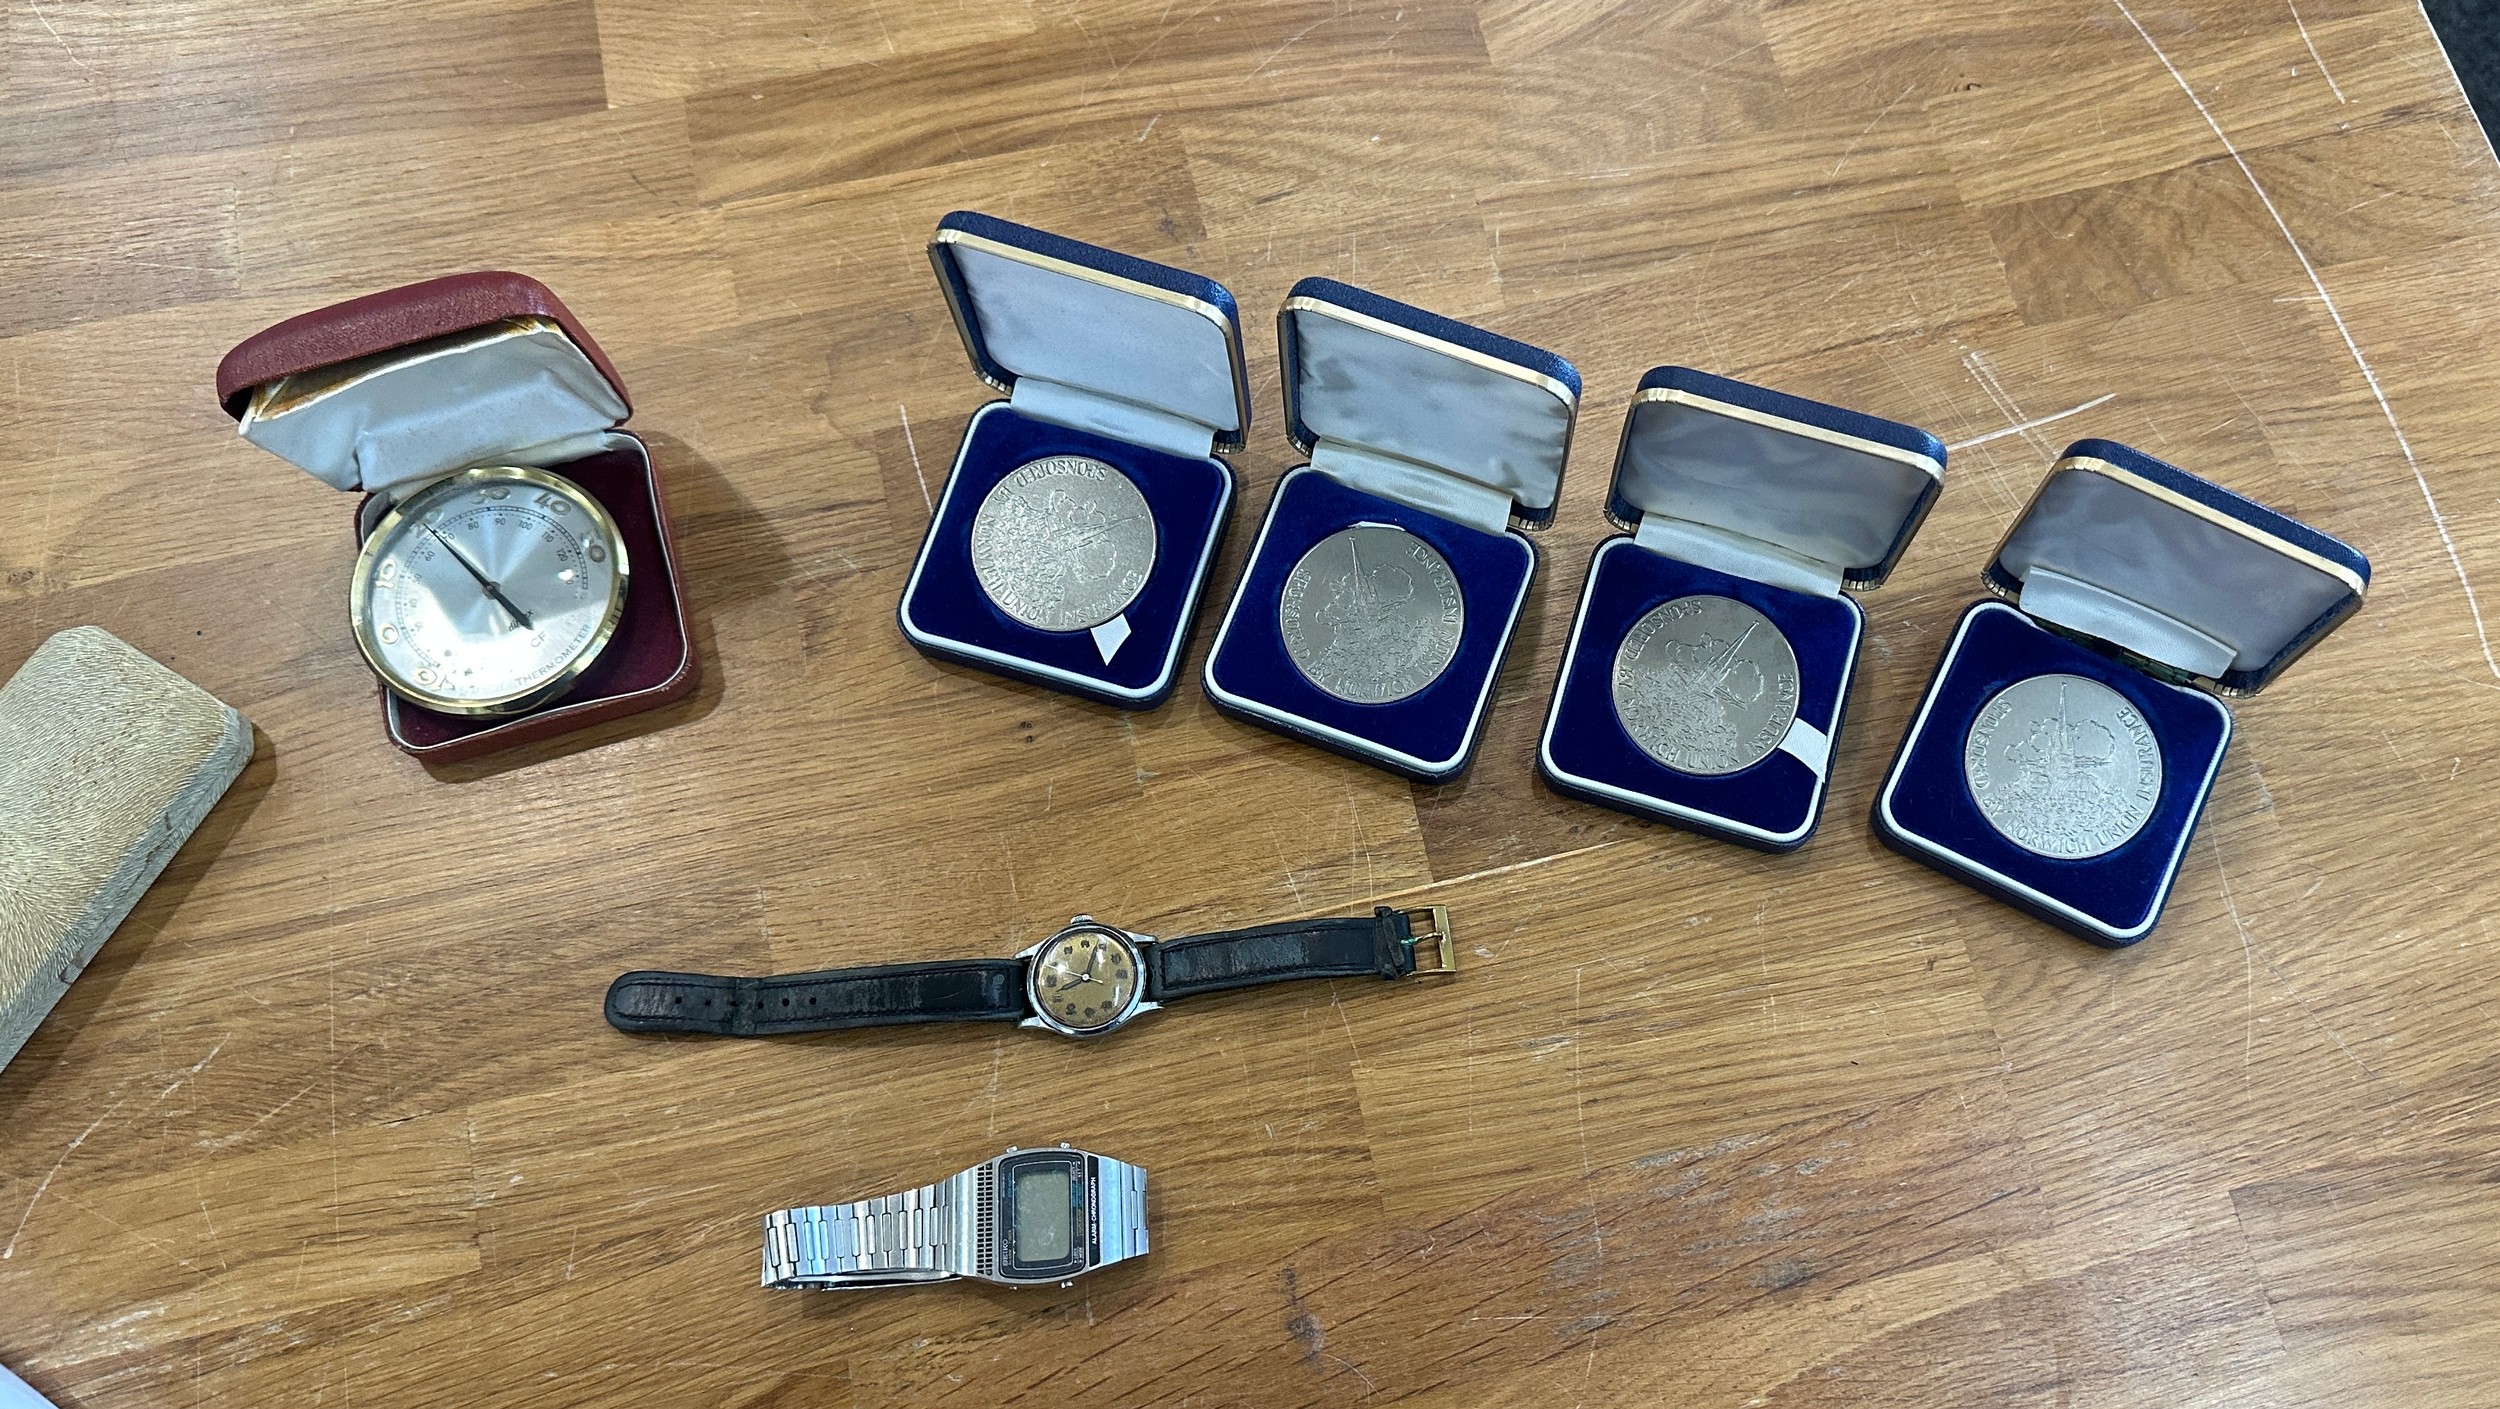 Selection of collectables includes 2 Vintage gents wrist watches includes Seiko, Elveter, both